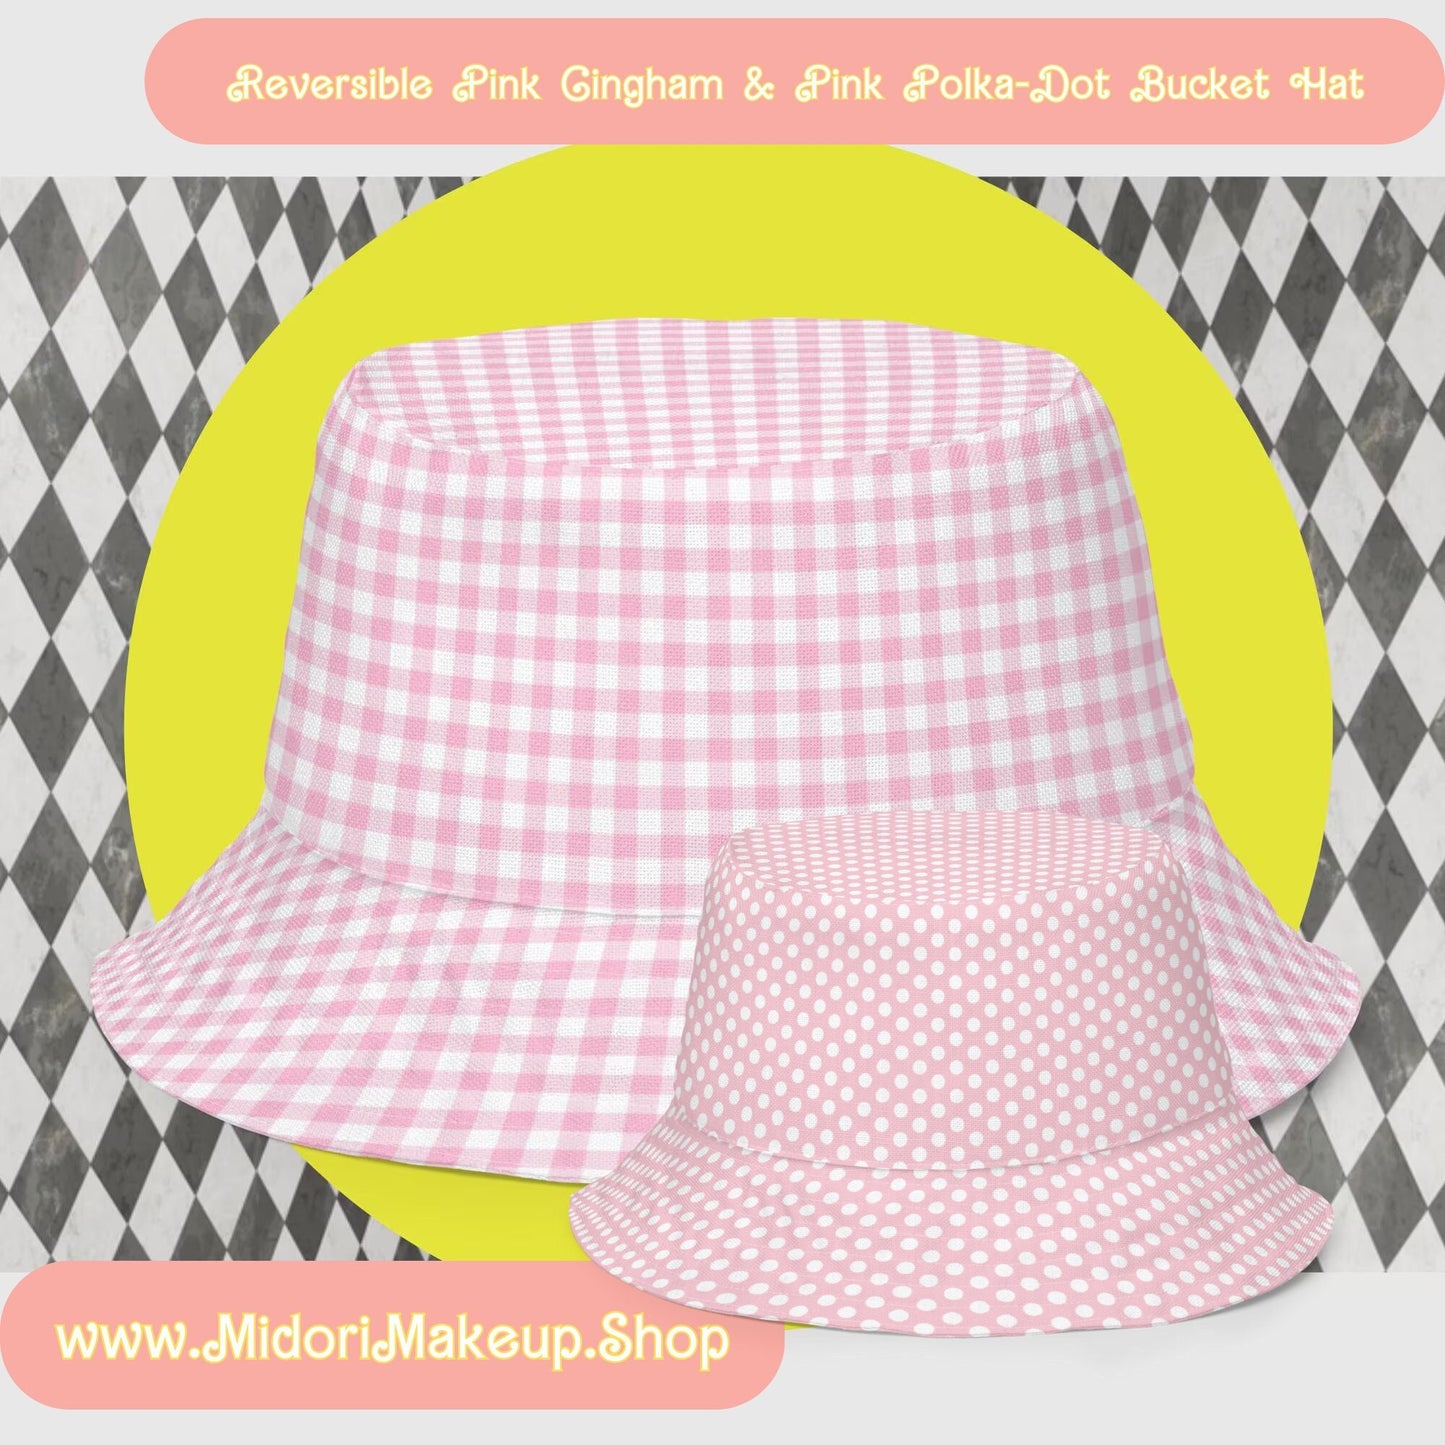 Pink Gingham y2k 90s 2000s Retro Checker Let's Go Party Britney Costume Cruise Sun-Hat Reversible bucket hat